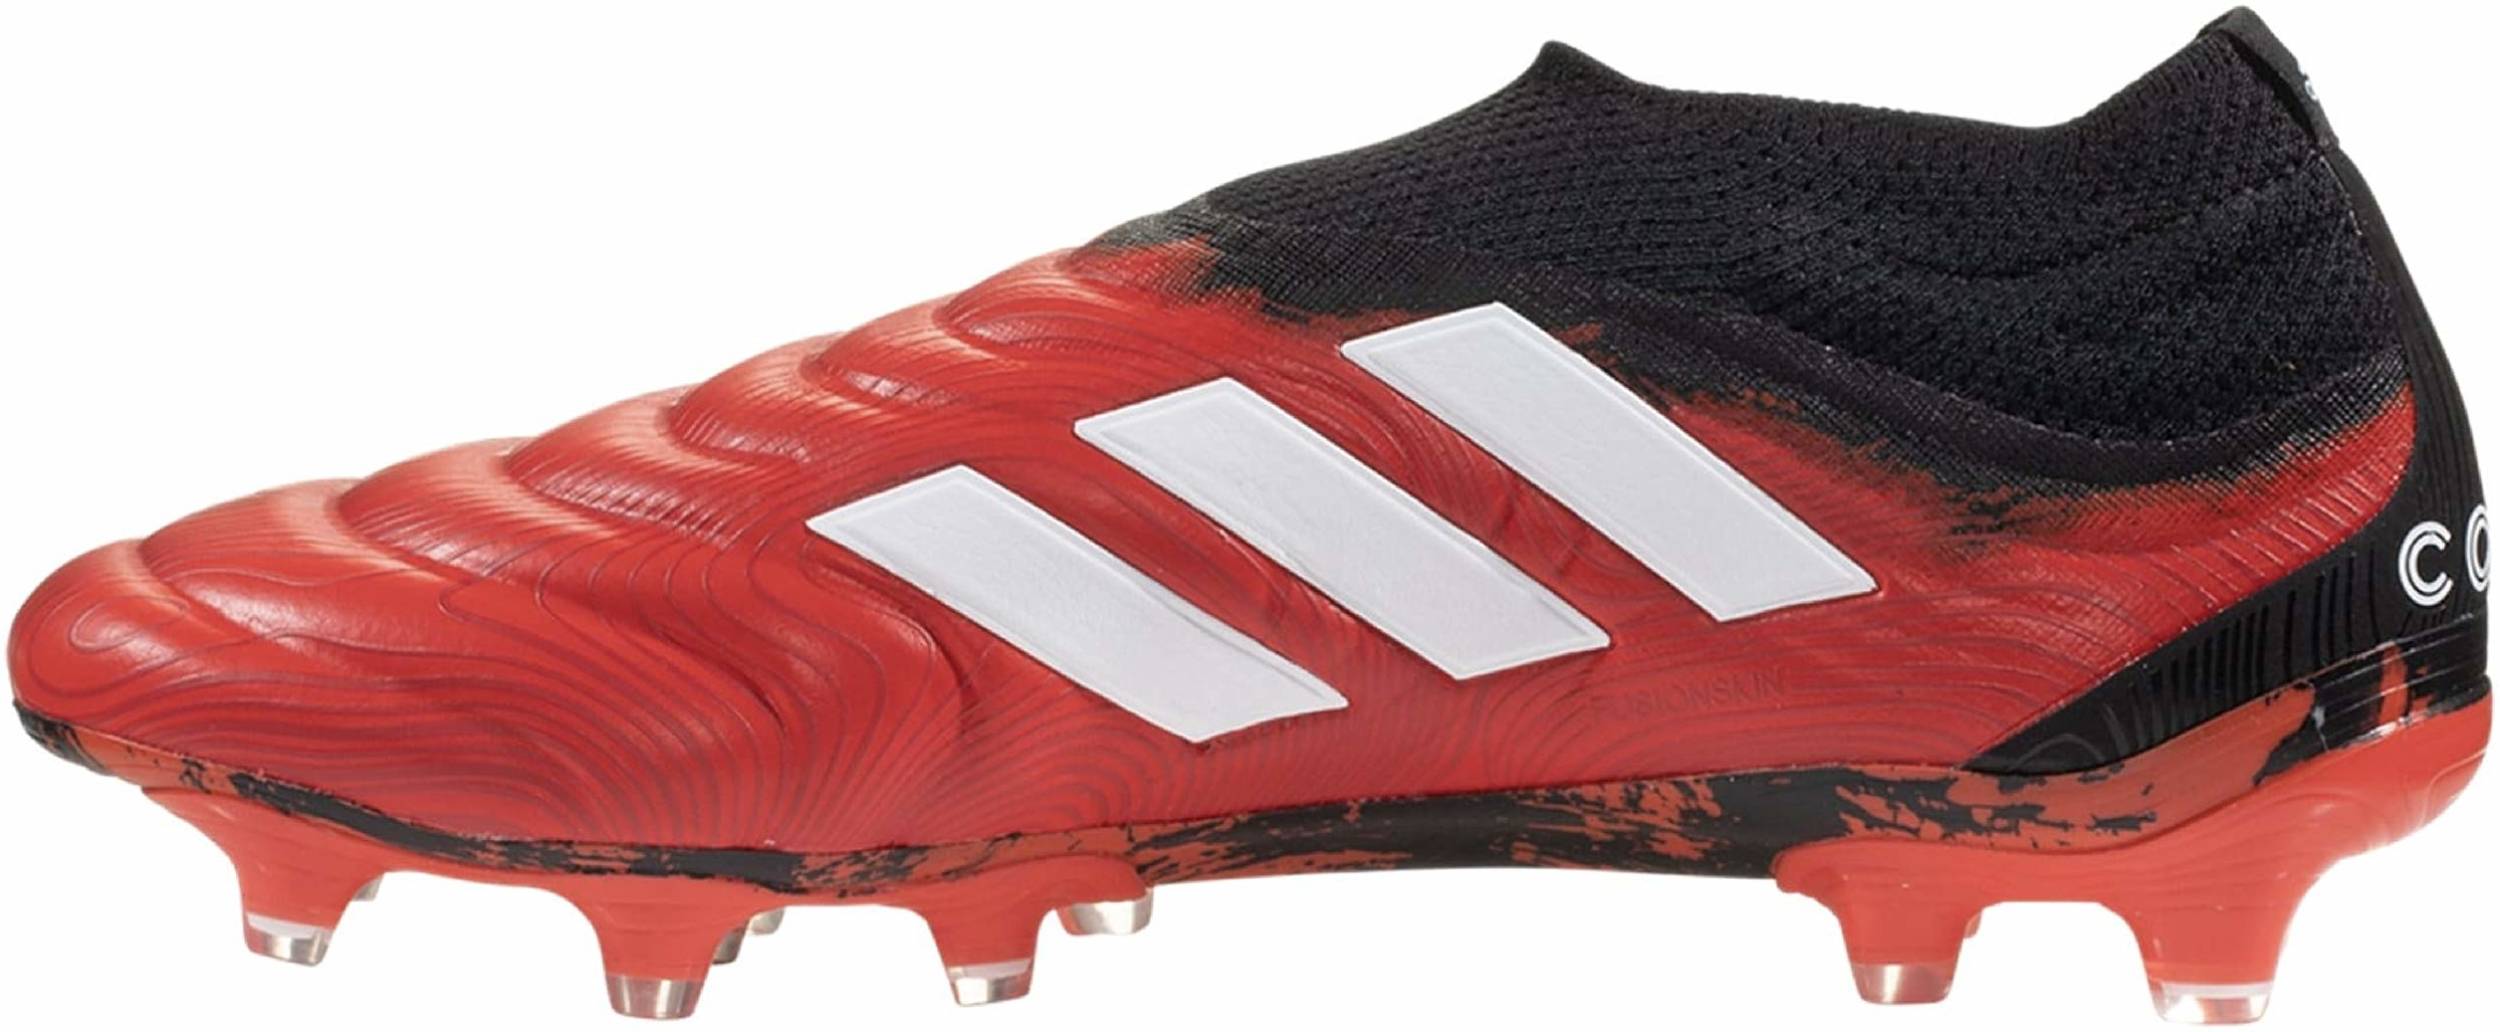 adidas wide soccer cleats